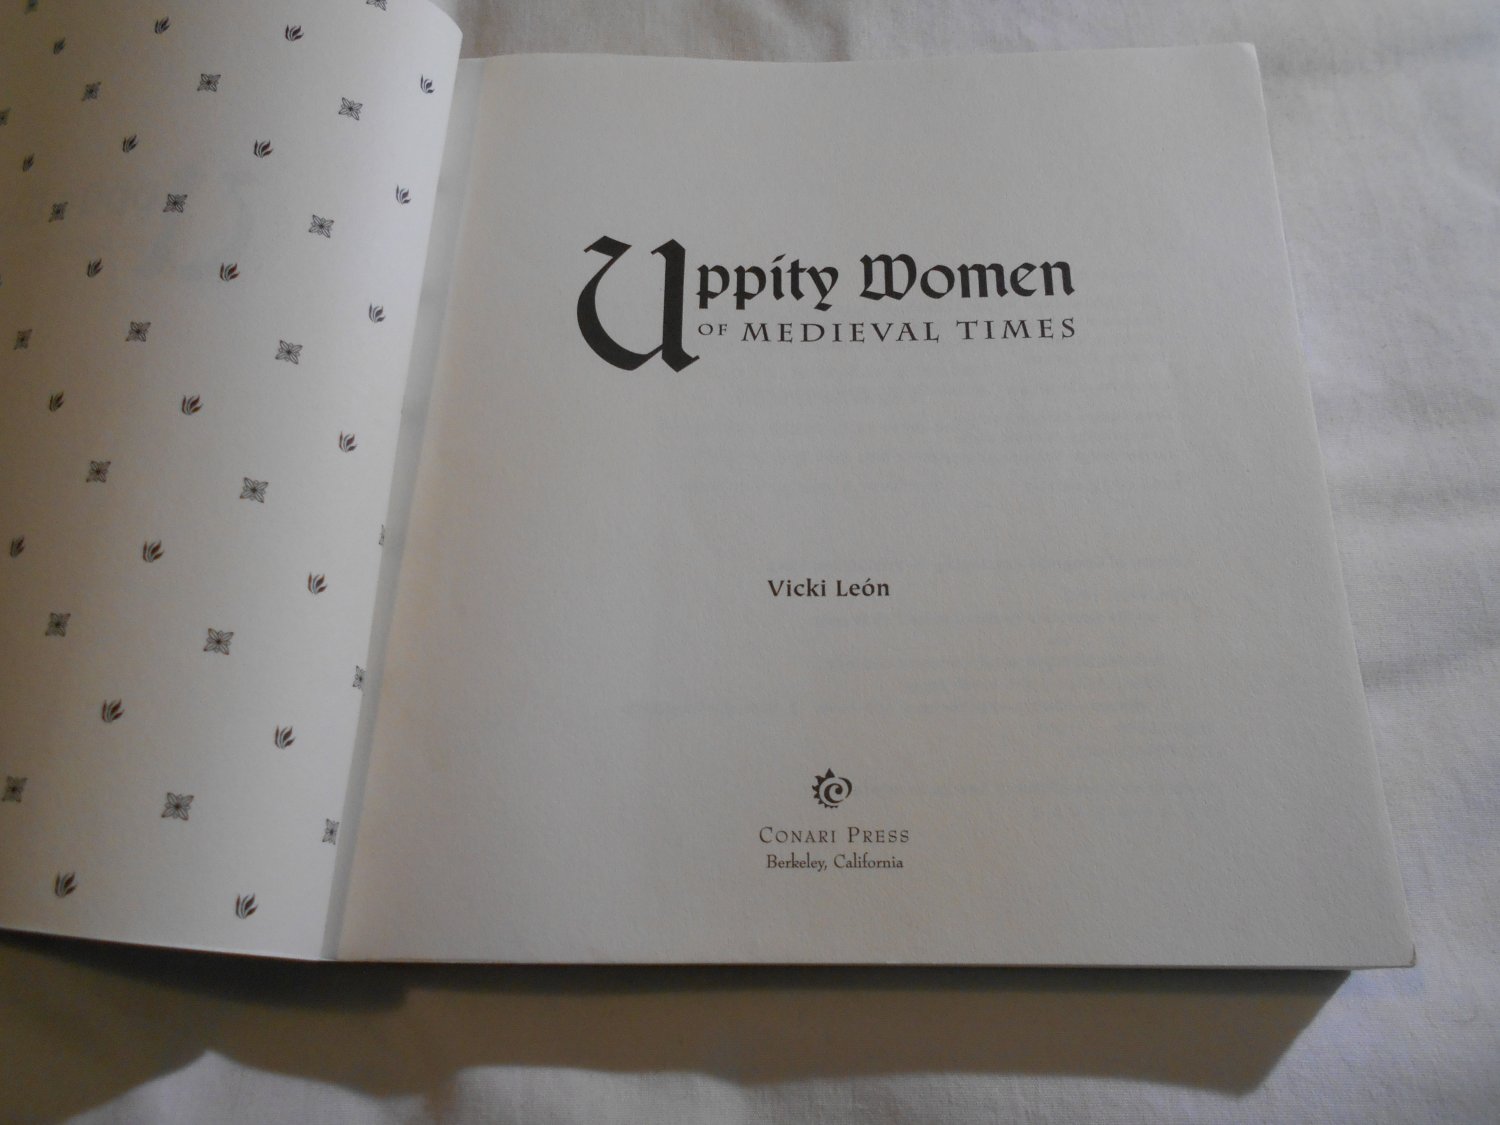 Uppity Women of Medieval Times by Vicki León